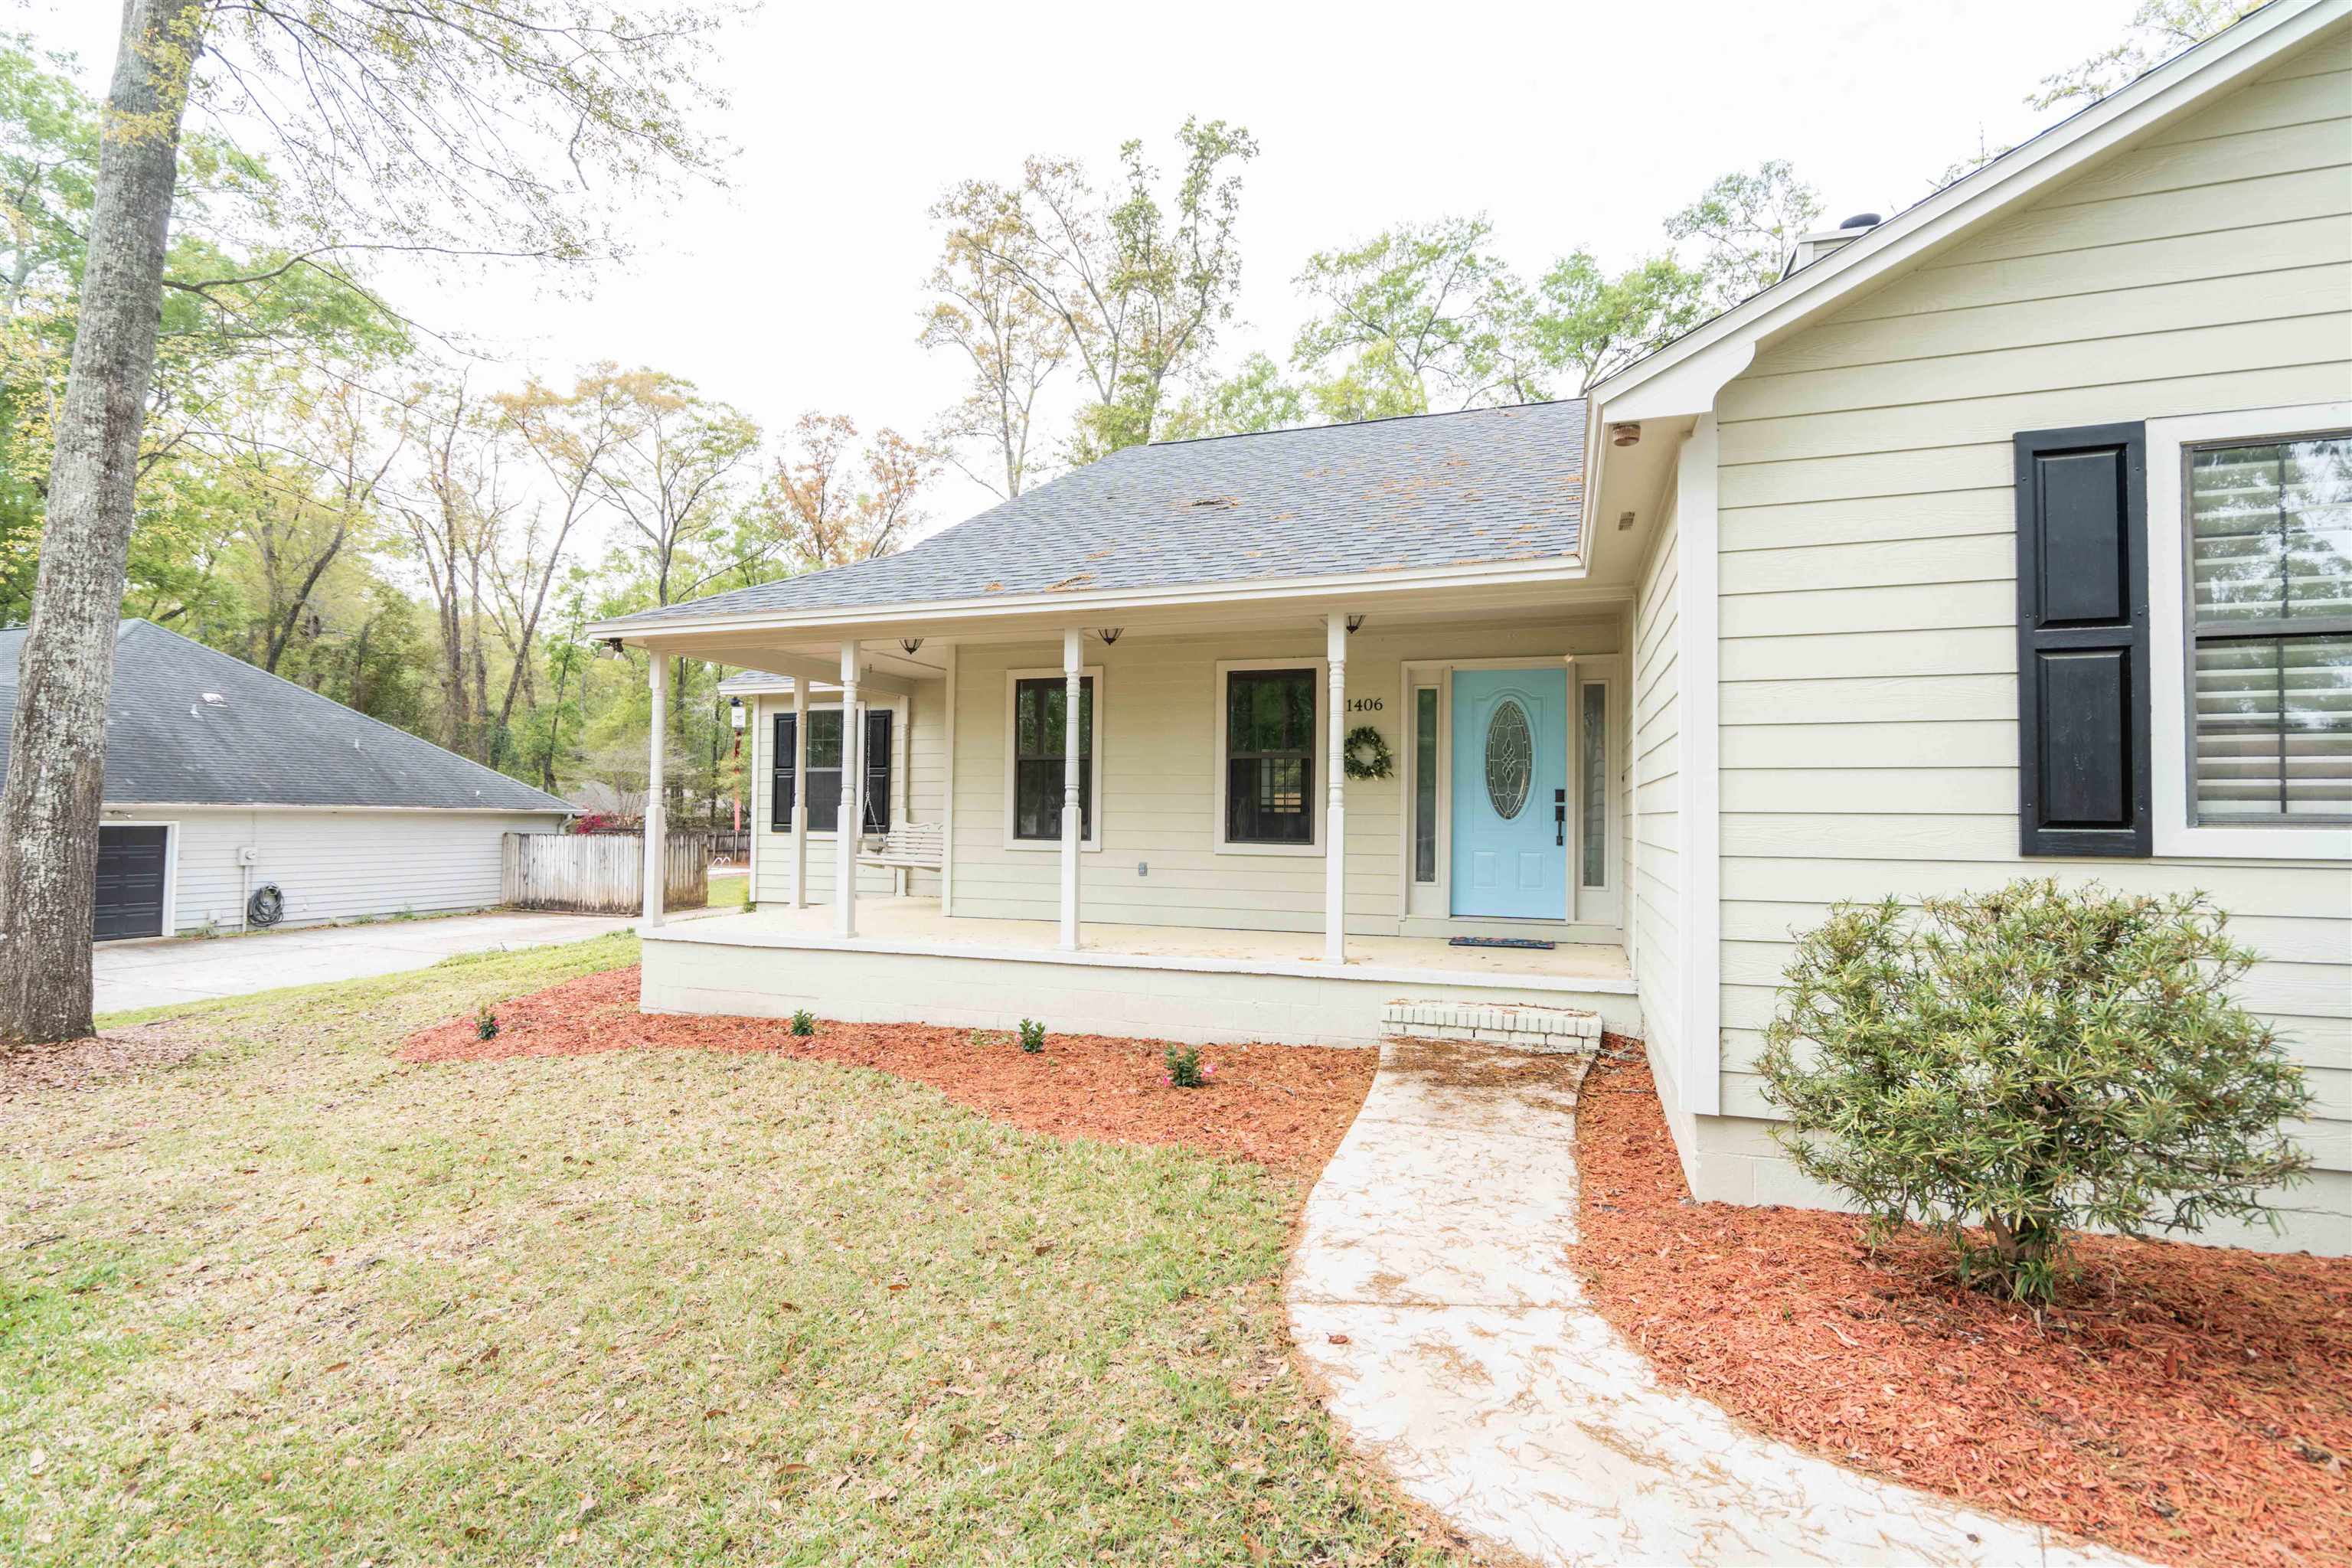 1406 Avondale Way,TALLAHASSEE,Florida 32317,3 Bedrooms Bedrooms,2 BathroomsBathrooms,Detached single family,1406 Avondale Way,369936